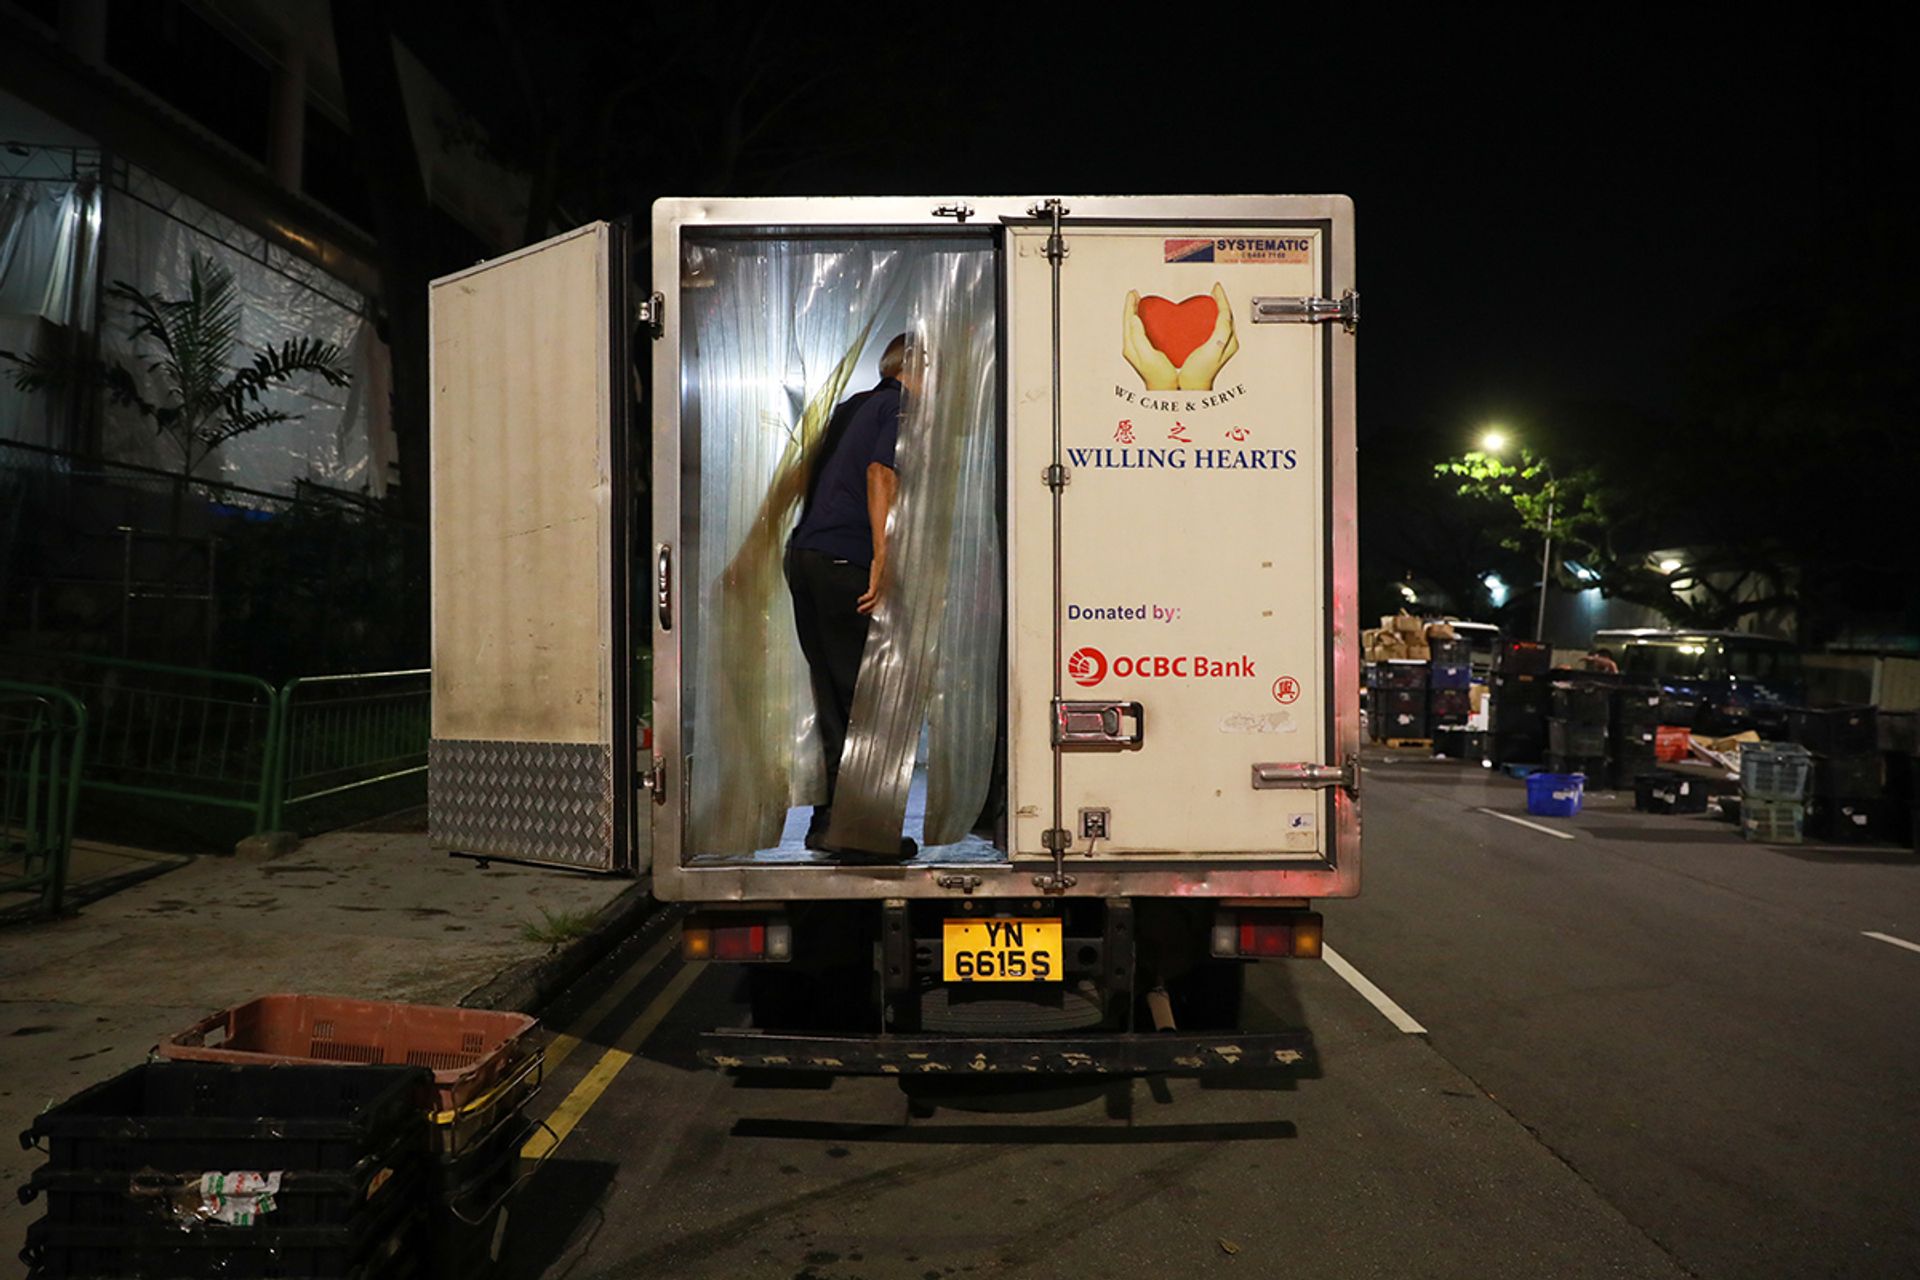 A representative from Willing Hearts loading up a lorry with unsold vegetables just before dawn on May 6. “At least the vegetables don’t go to waste,” said wholesaler Ong Chai Meng when The Straits Times asked about the initiative. “It’s a small thing lah.”